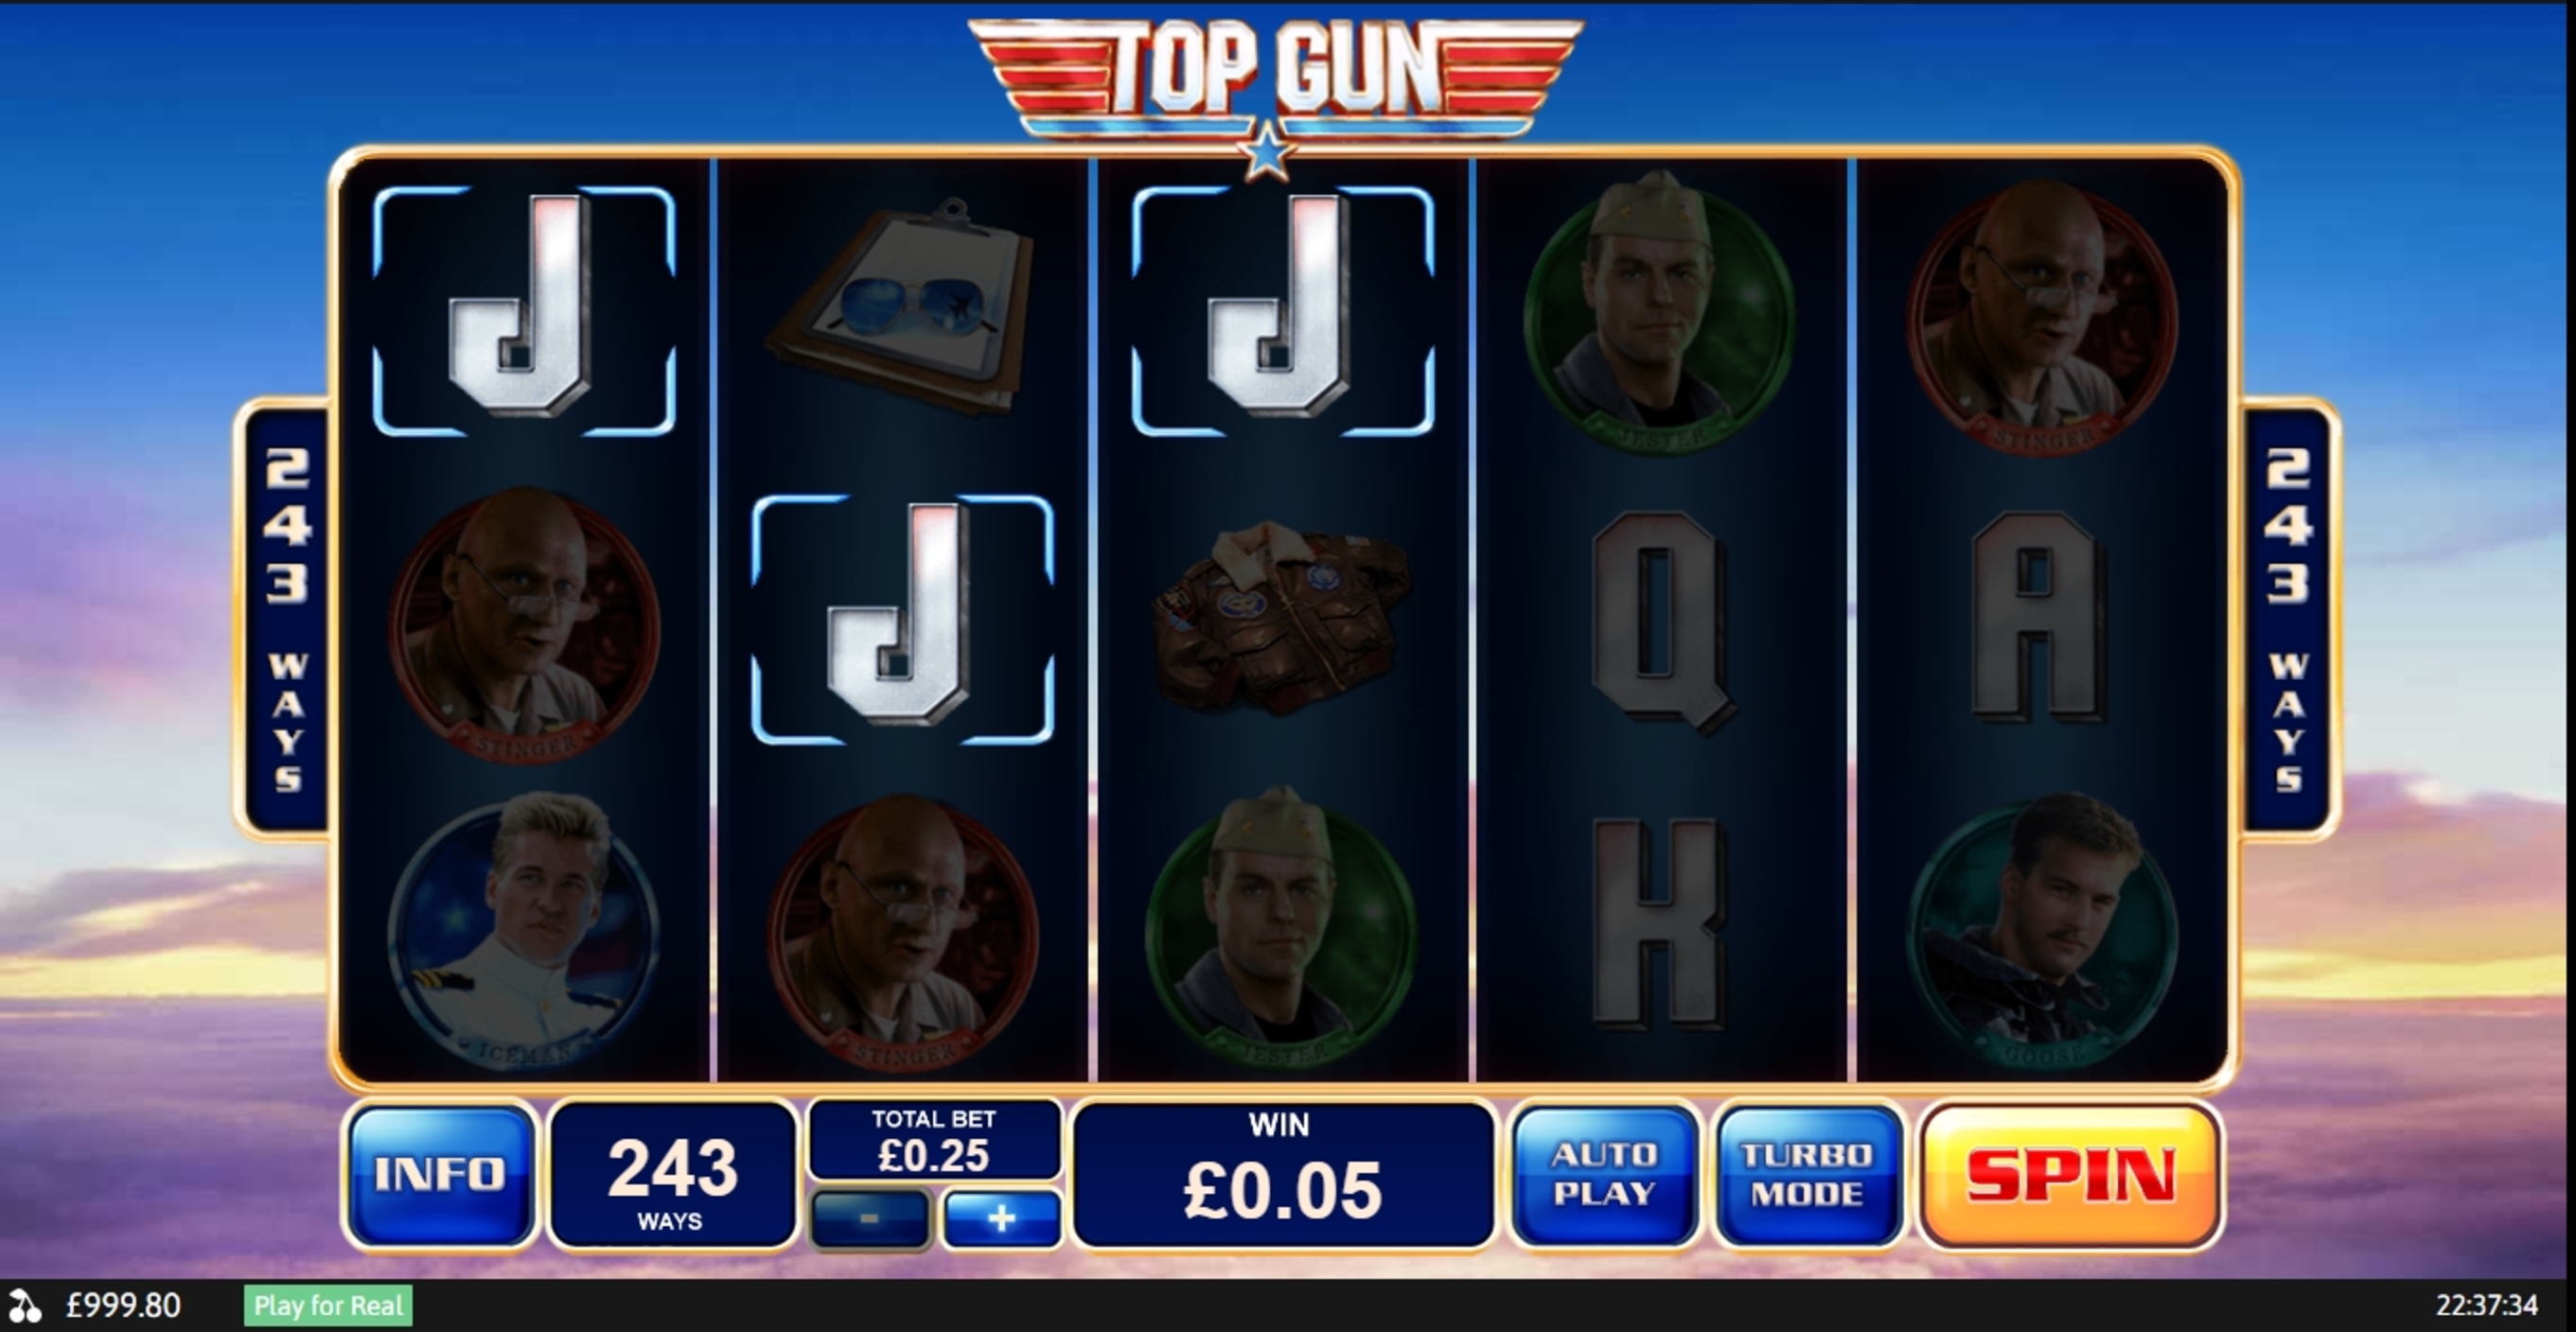 Win Money in Top Gun Free Slot Game by Playtech